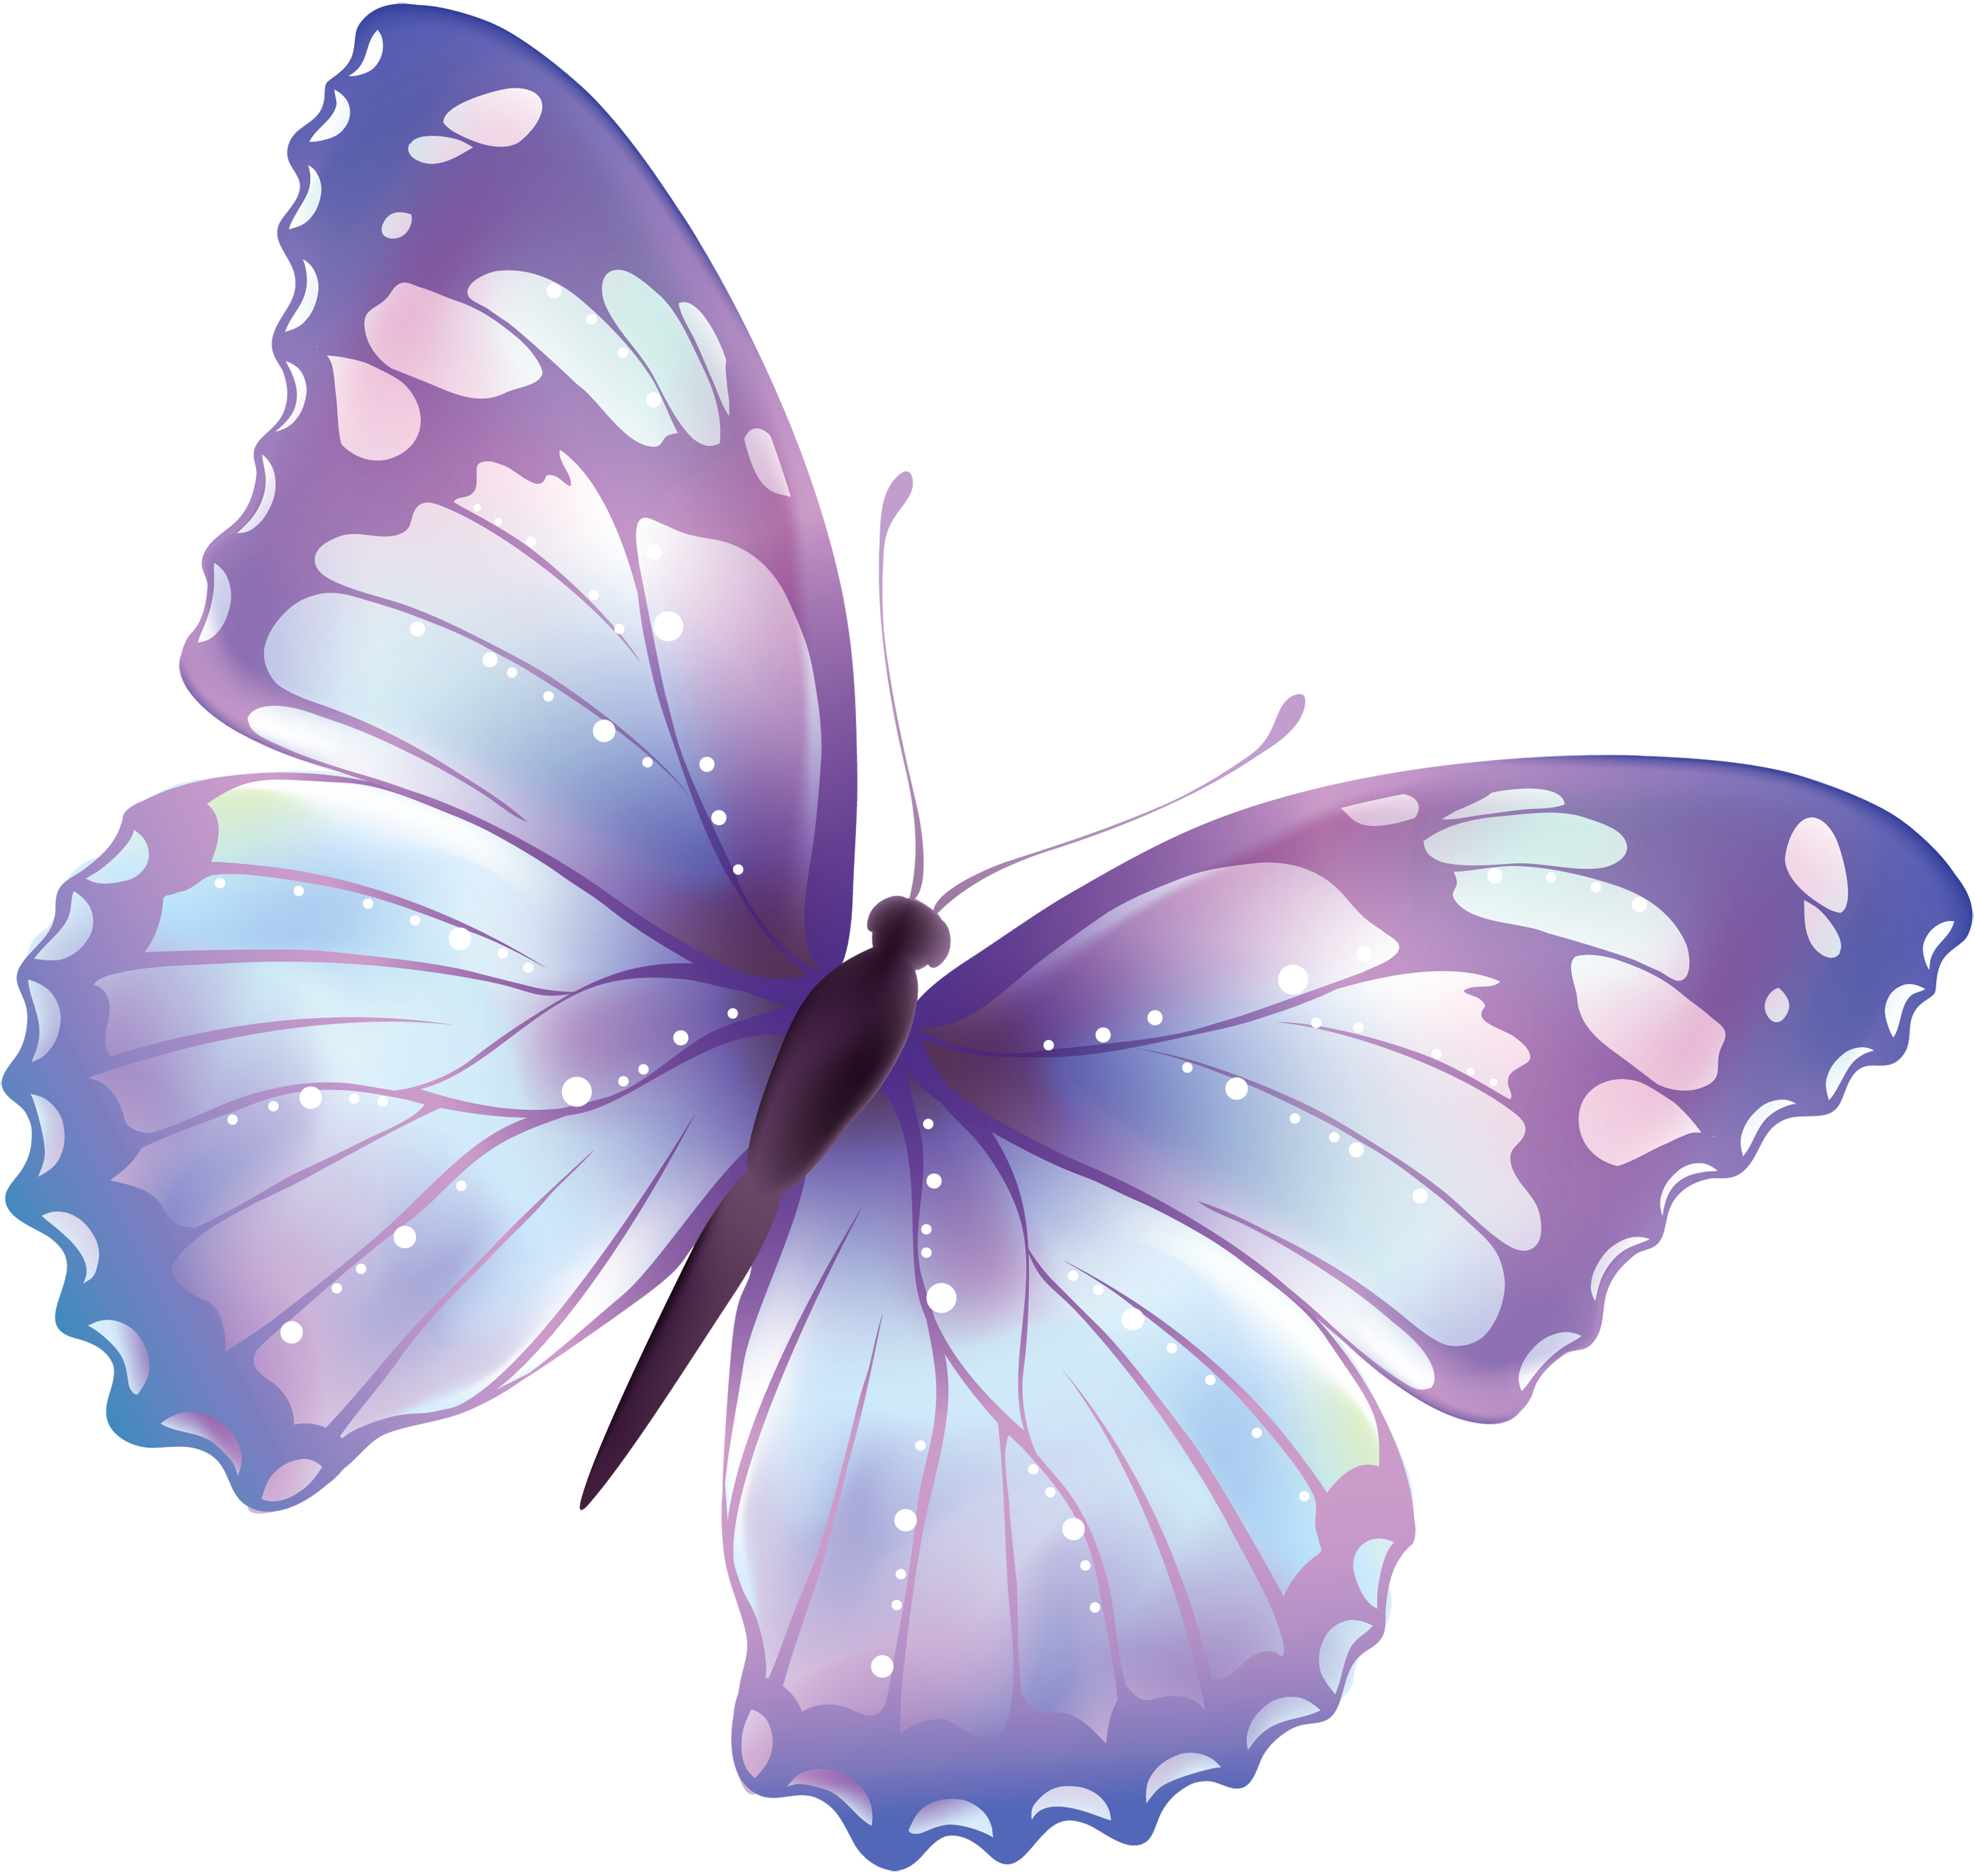 Butterfly PNG Image - PurePNG | Free transparent CC0 PNG Image Library